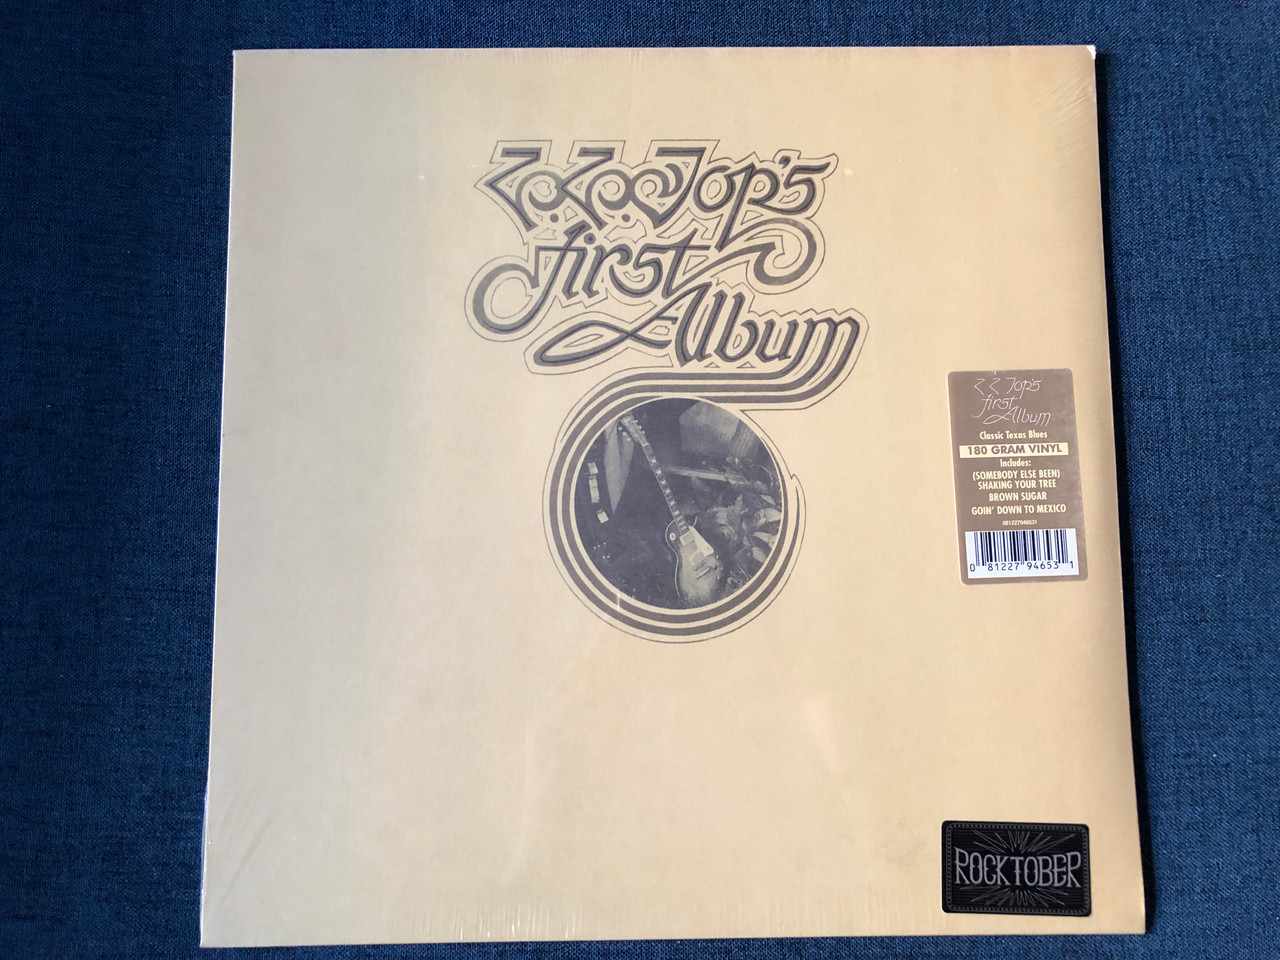 ZZ Top's First Album / 180 Gram Vinyl / Includes: (Somebody Else Been)  Shaking Your Tree, Brown Sugar, Goin' Down To Mexico / Warner Records LP /  081227934514-1 - bibleinmylanguage